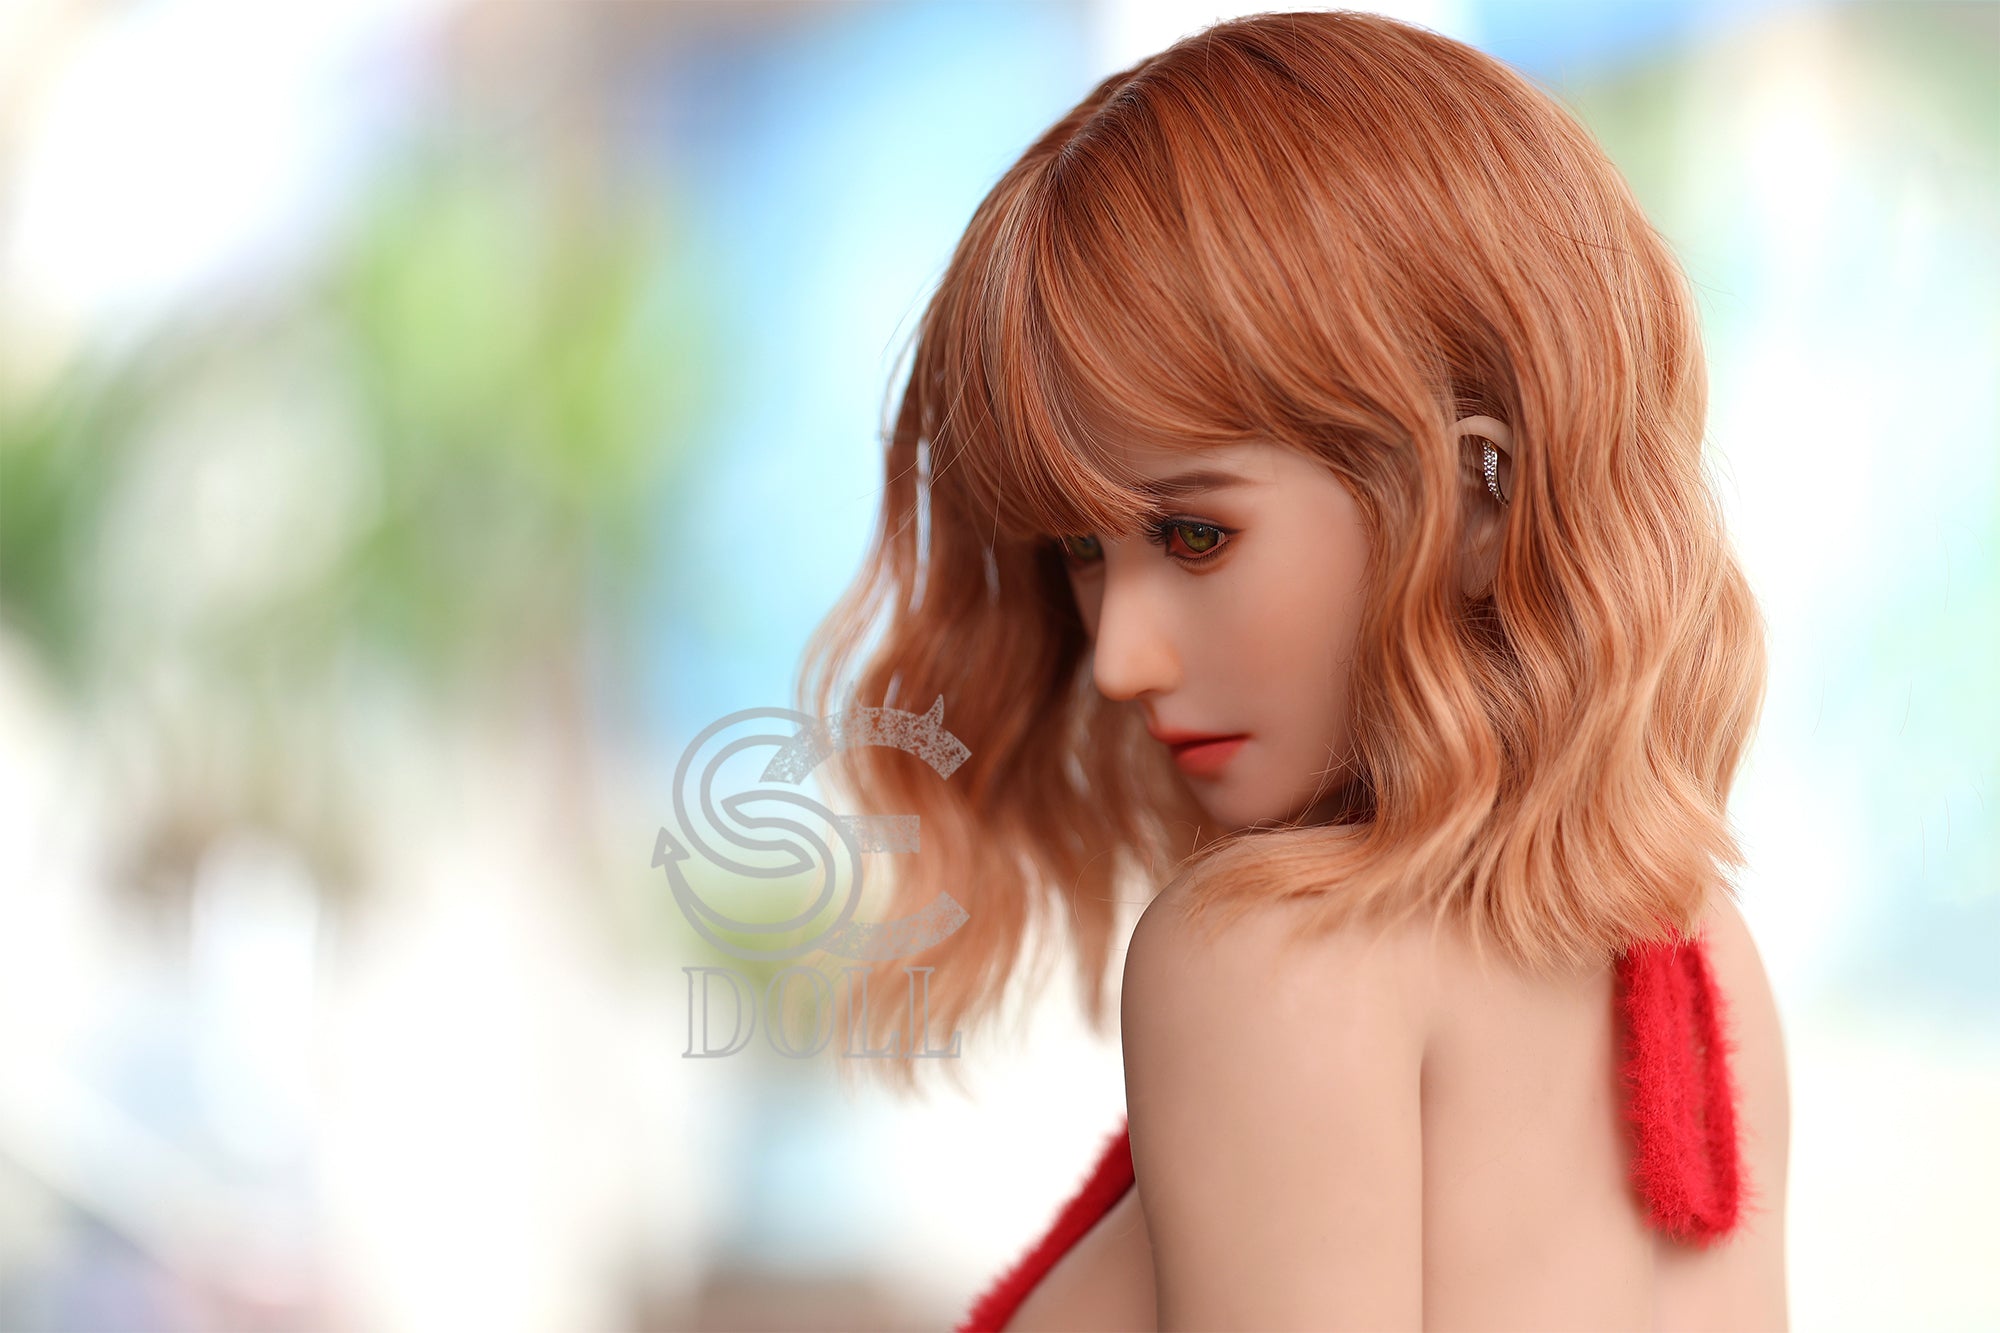 SEDOLL 161 cm F TPE - Phoebe | Buy Sex Dolls at DOLLS ACTUALLY